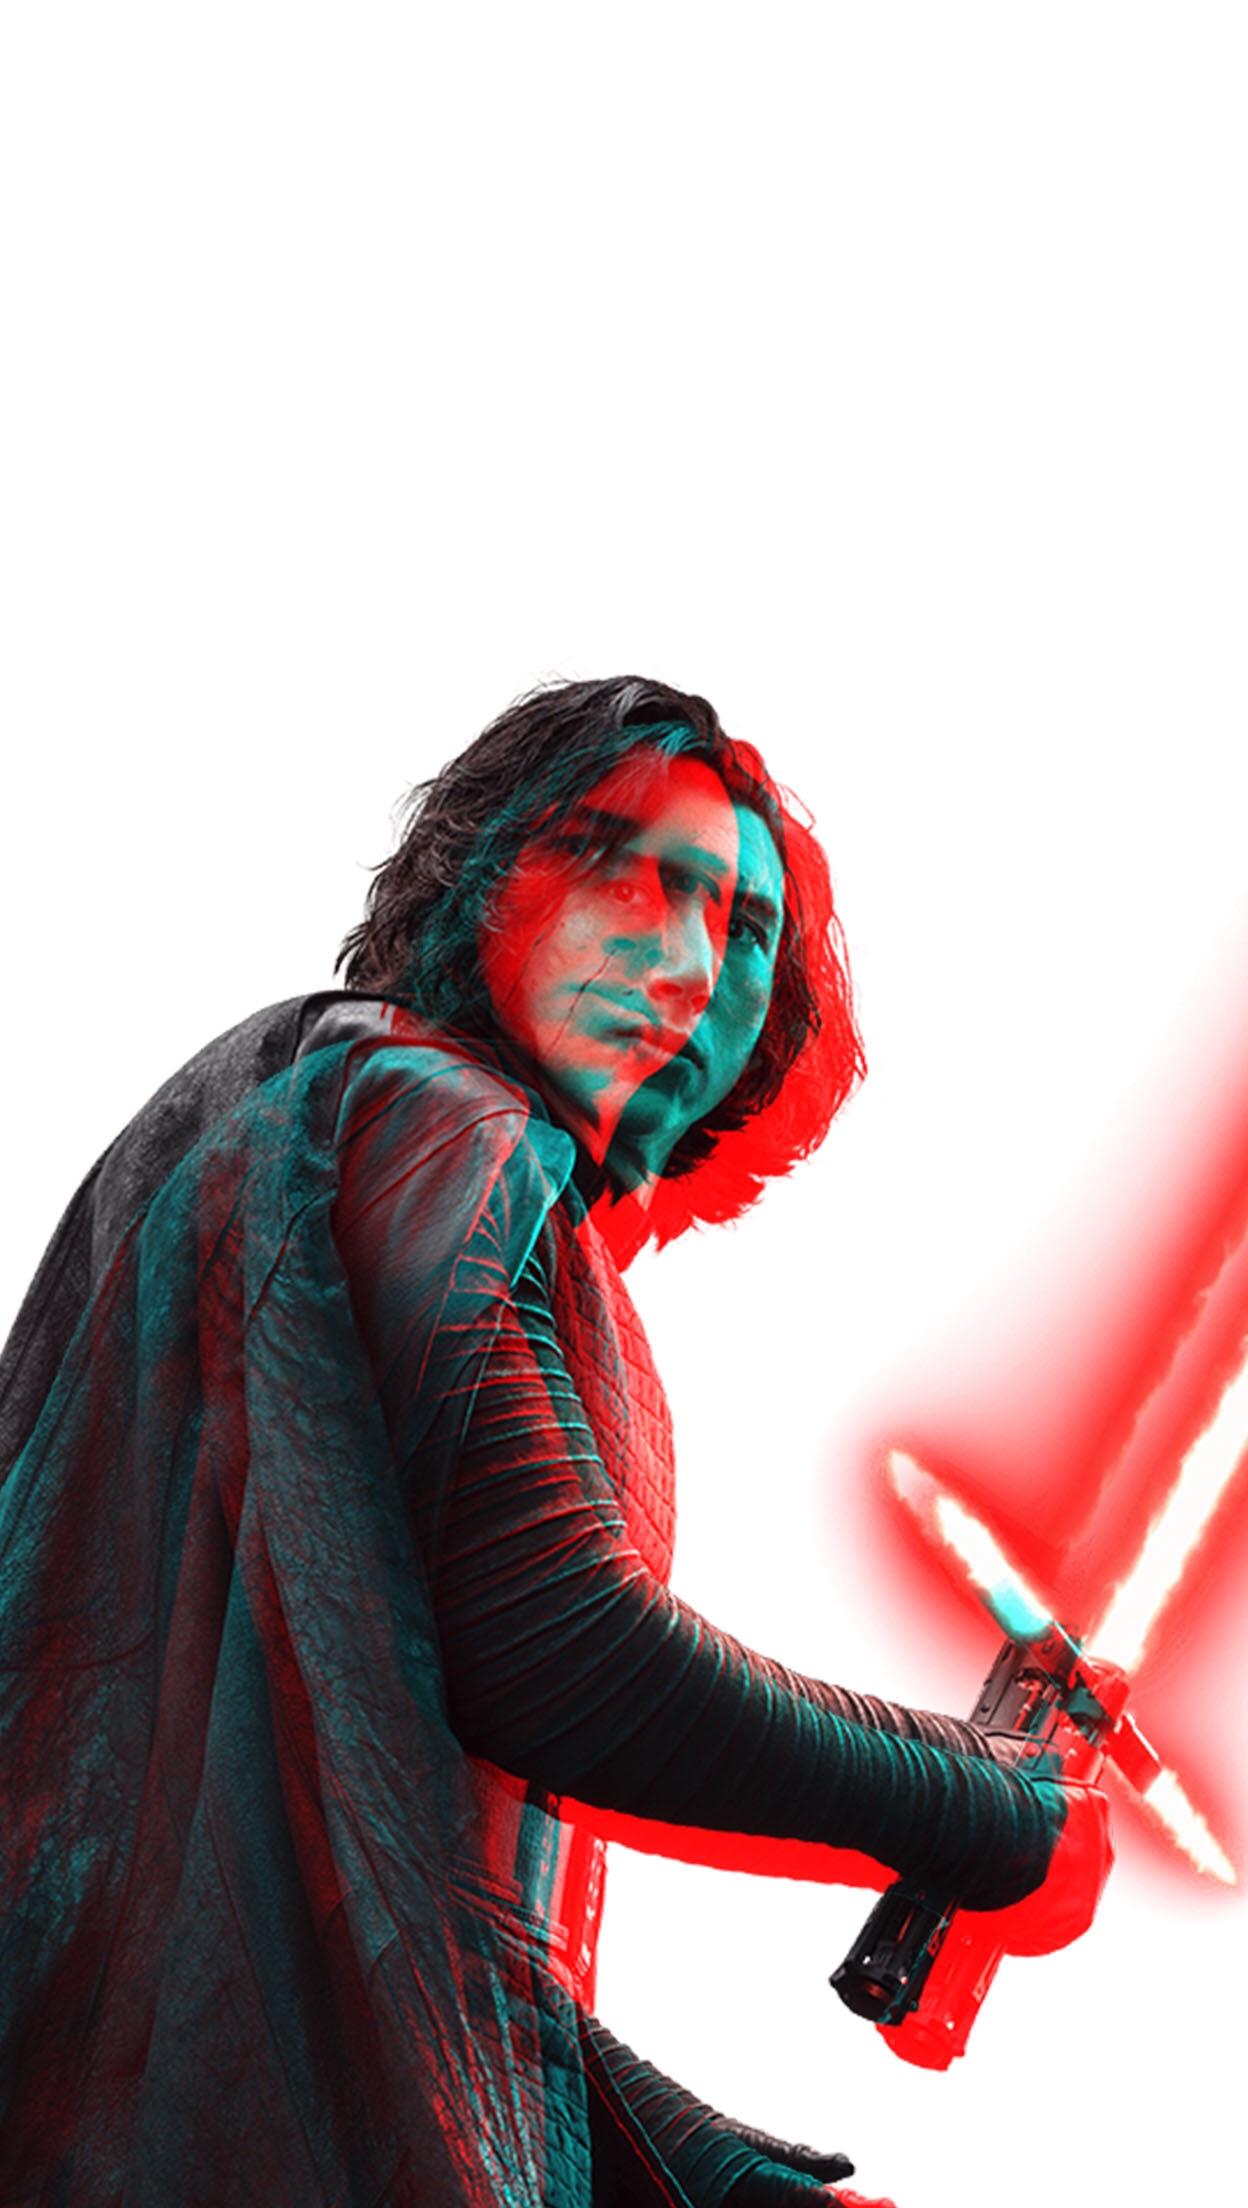 Made this Kylo Ren wallpaper for my phone if anyone else wants it?